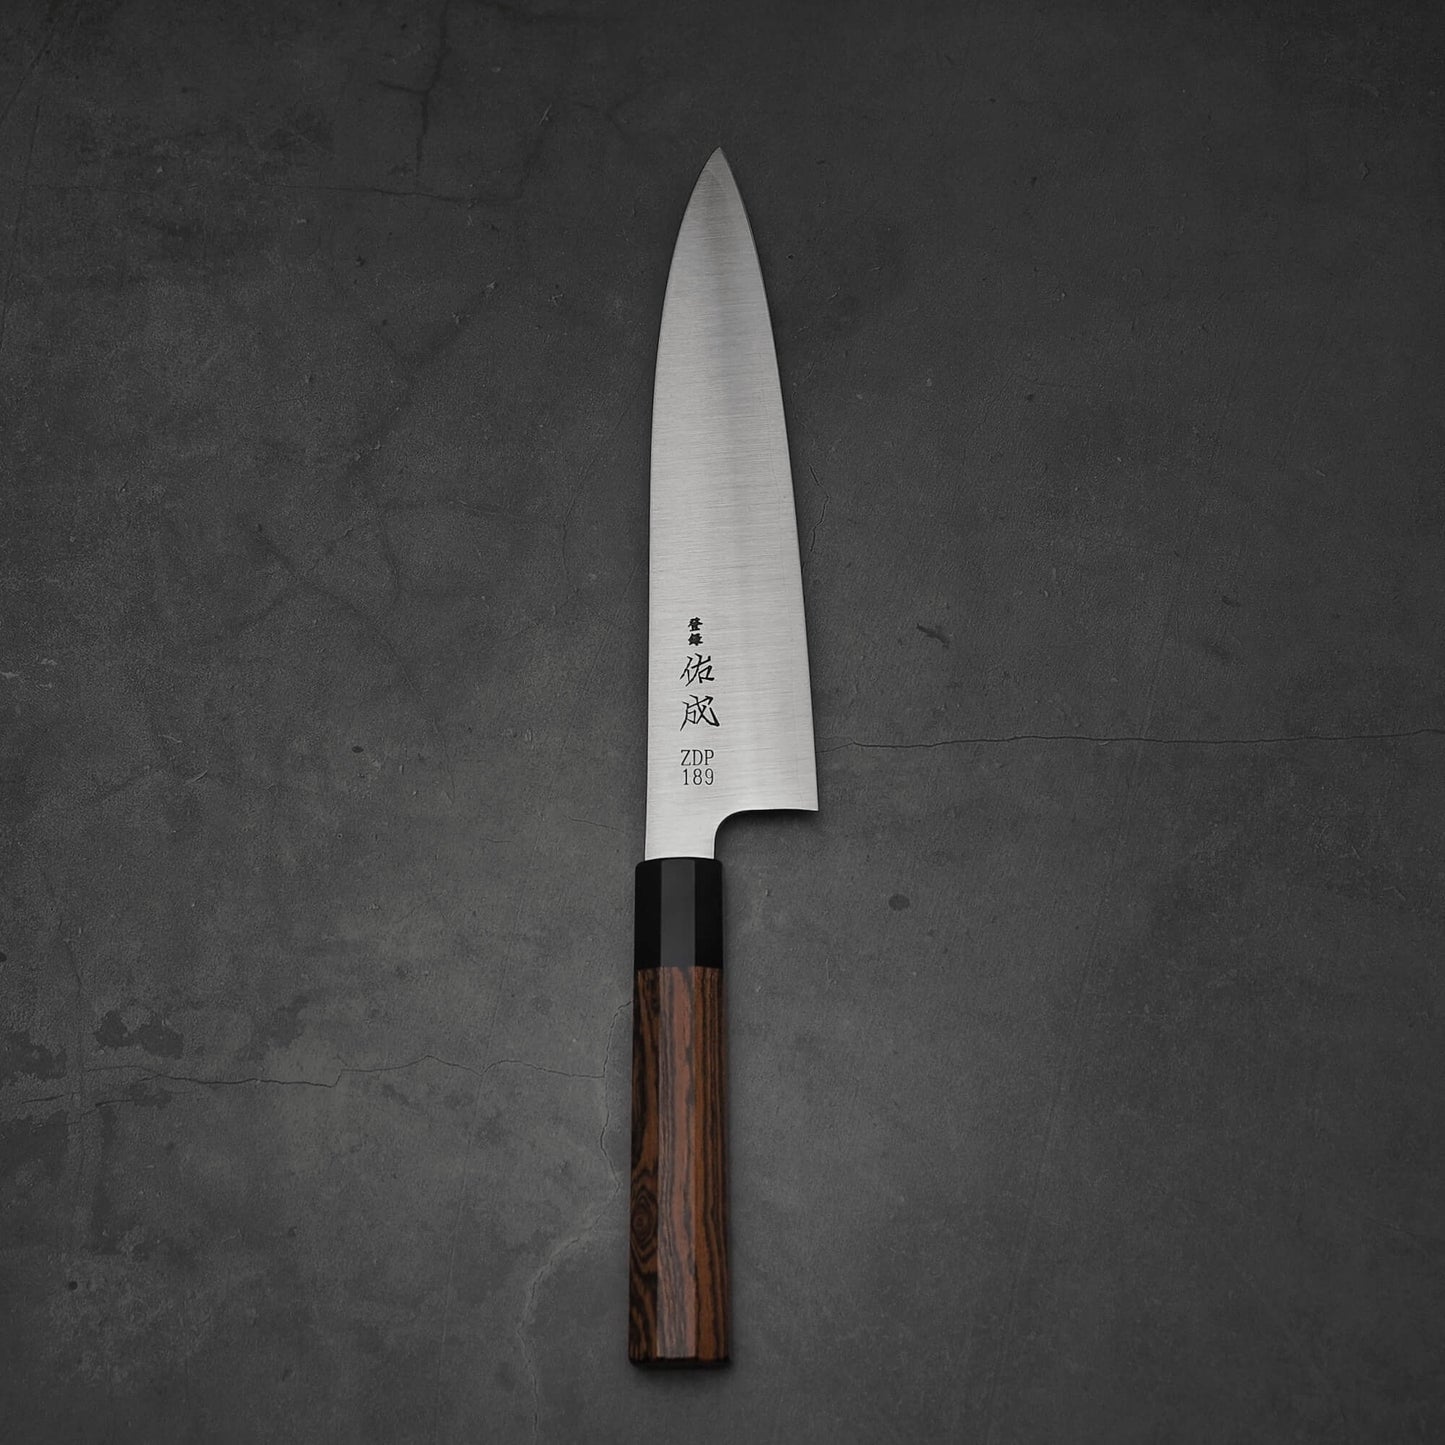 Top view of 210mm Sukenari ZDP189 gyuto knife in vertical position.